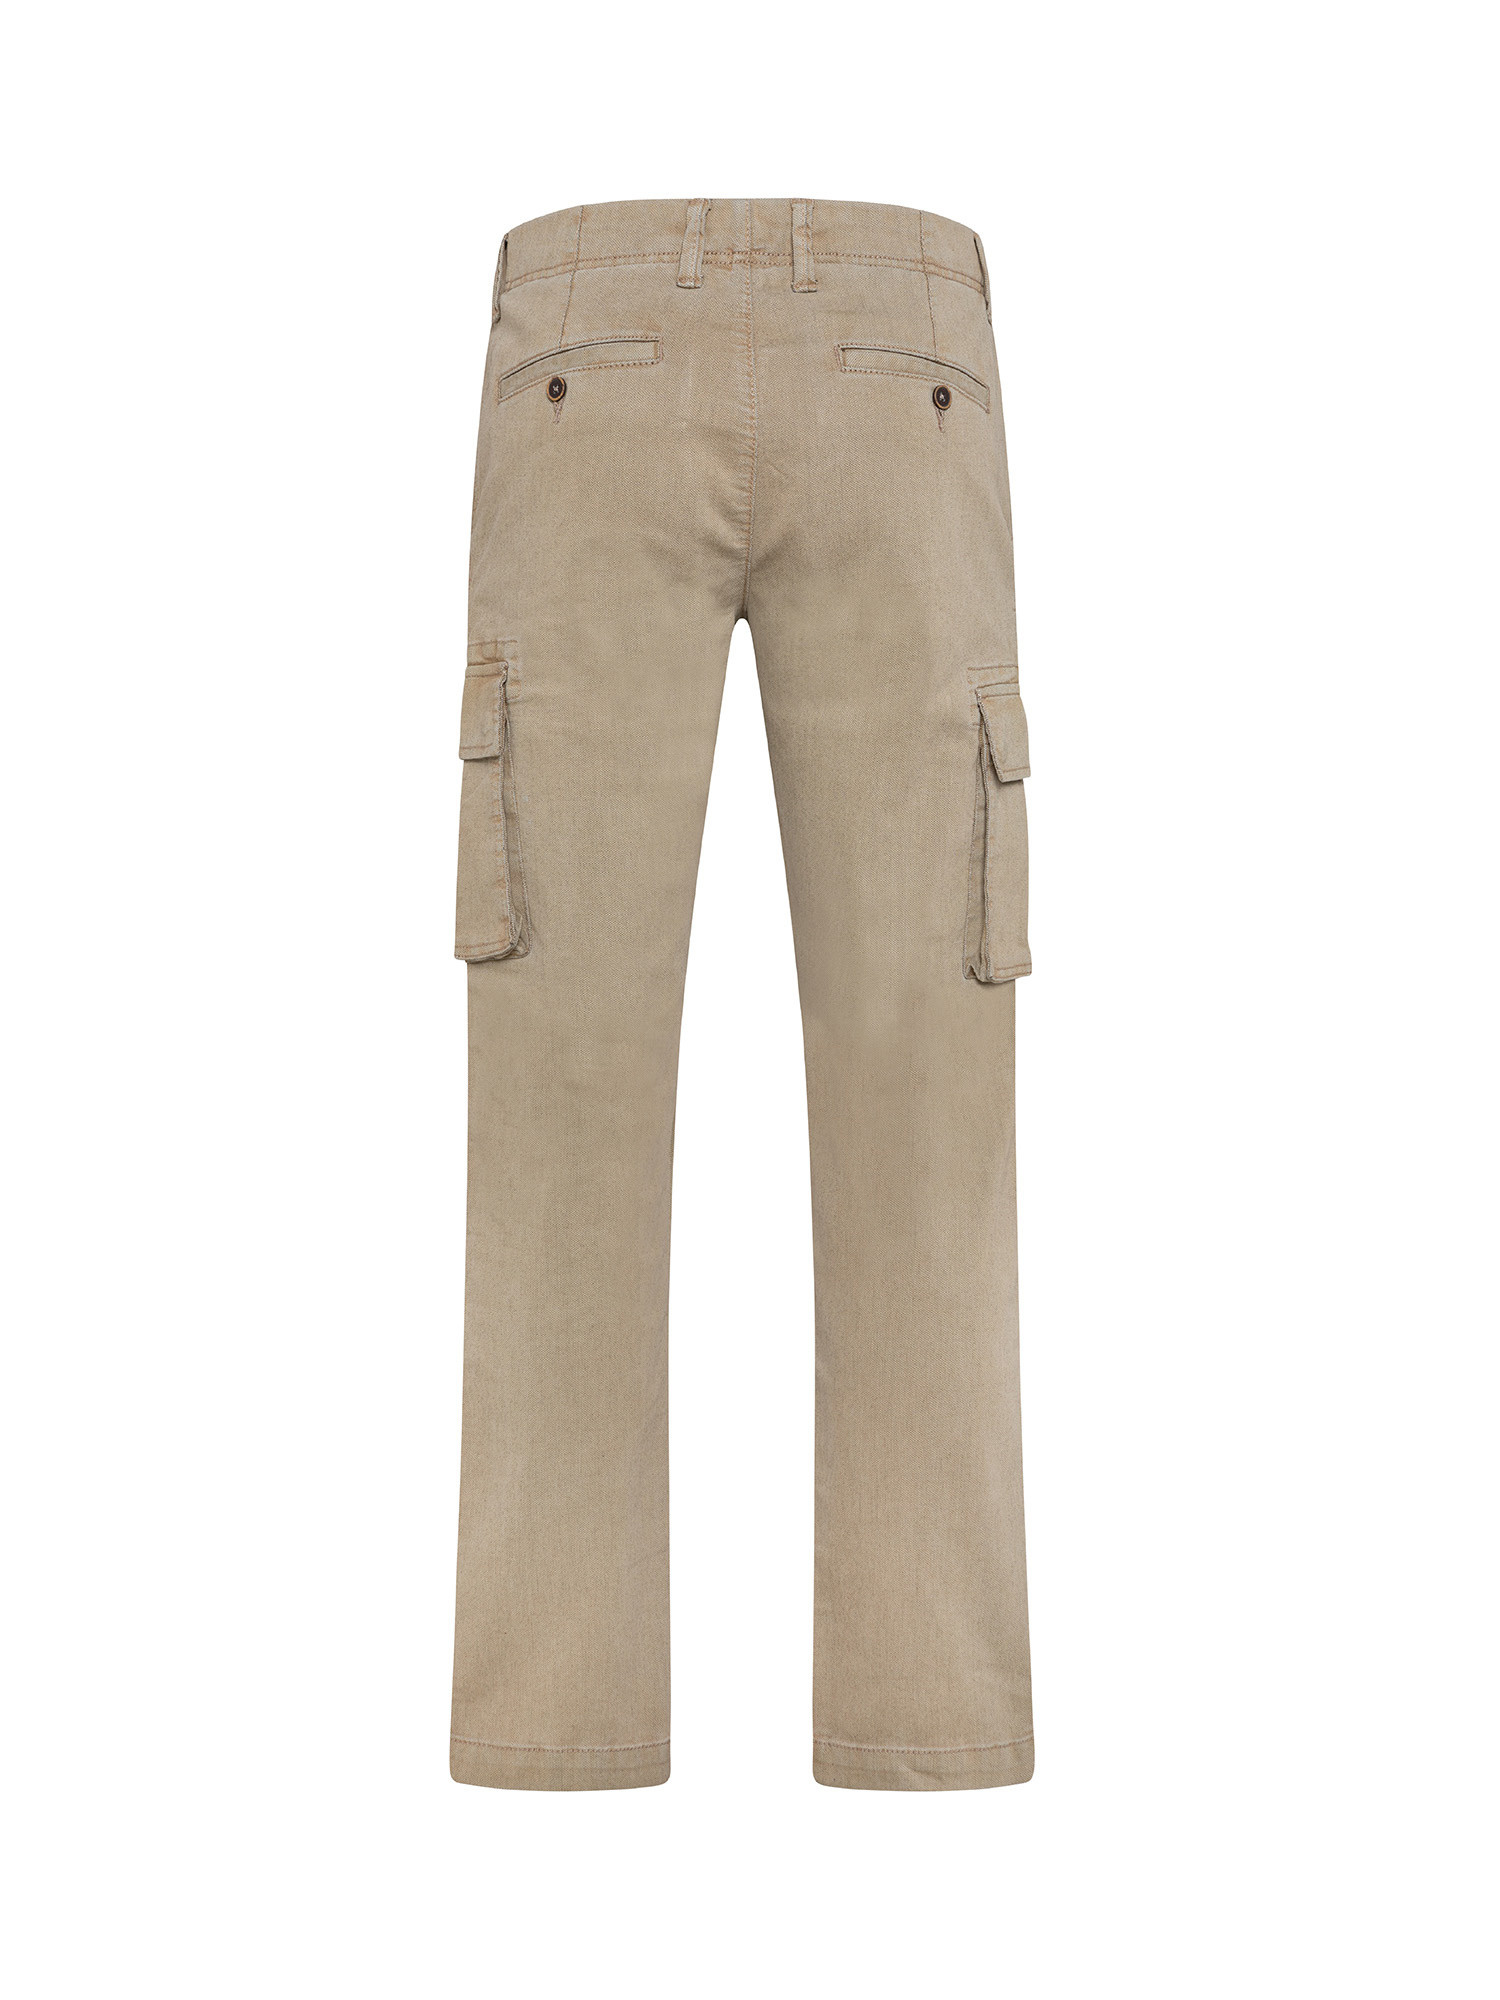 JCT - Slim fit cargo trousers, Beige, large image number 1